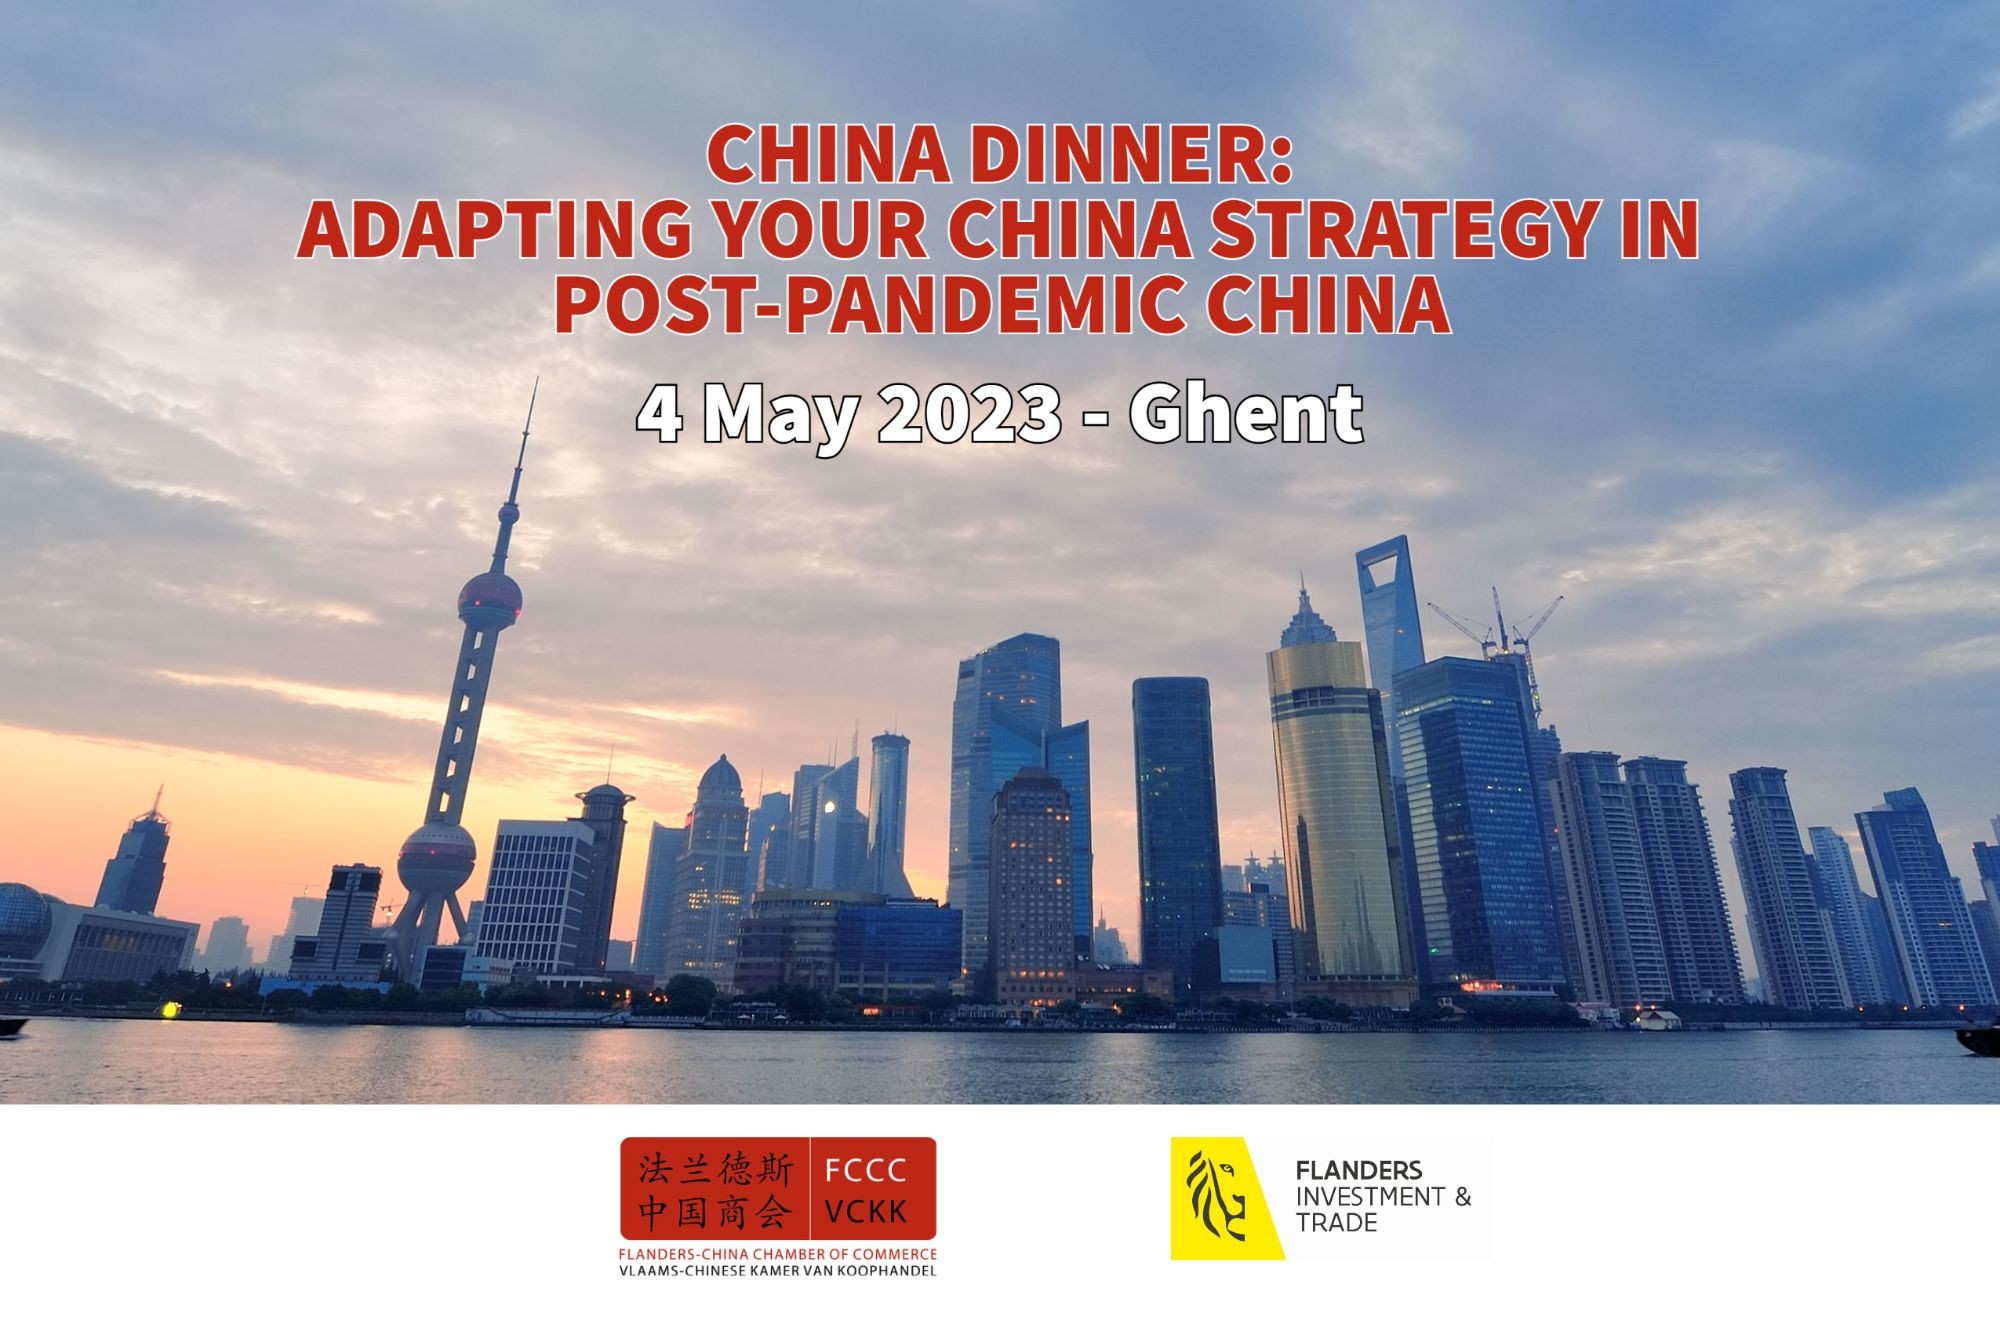 Networking Event: China Dinner: Adapting Your China Strategy in Post-Pandemic China -  4 May 2023 at 17h30